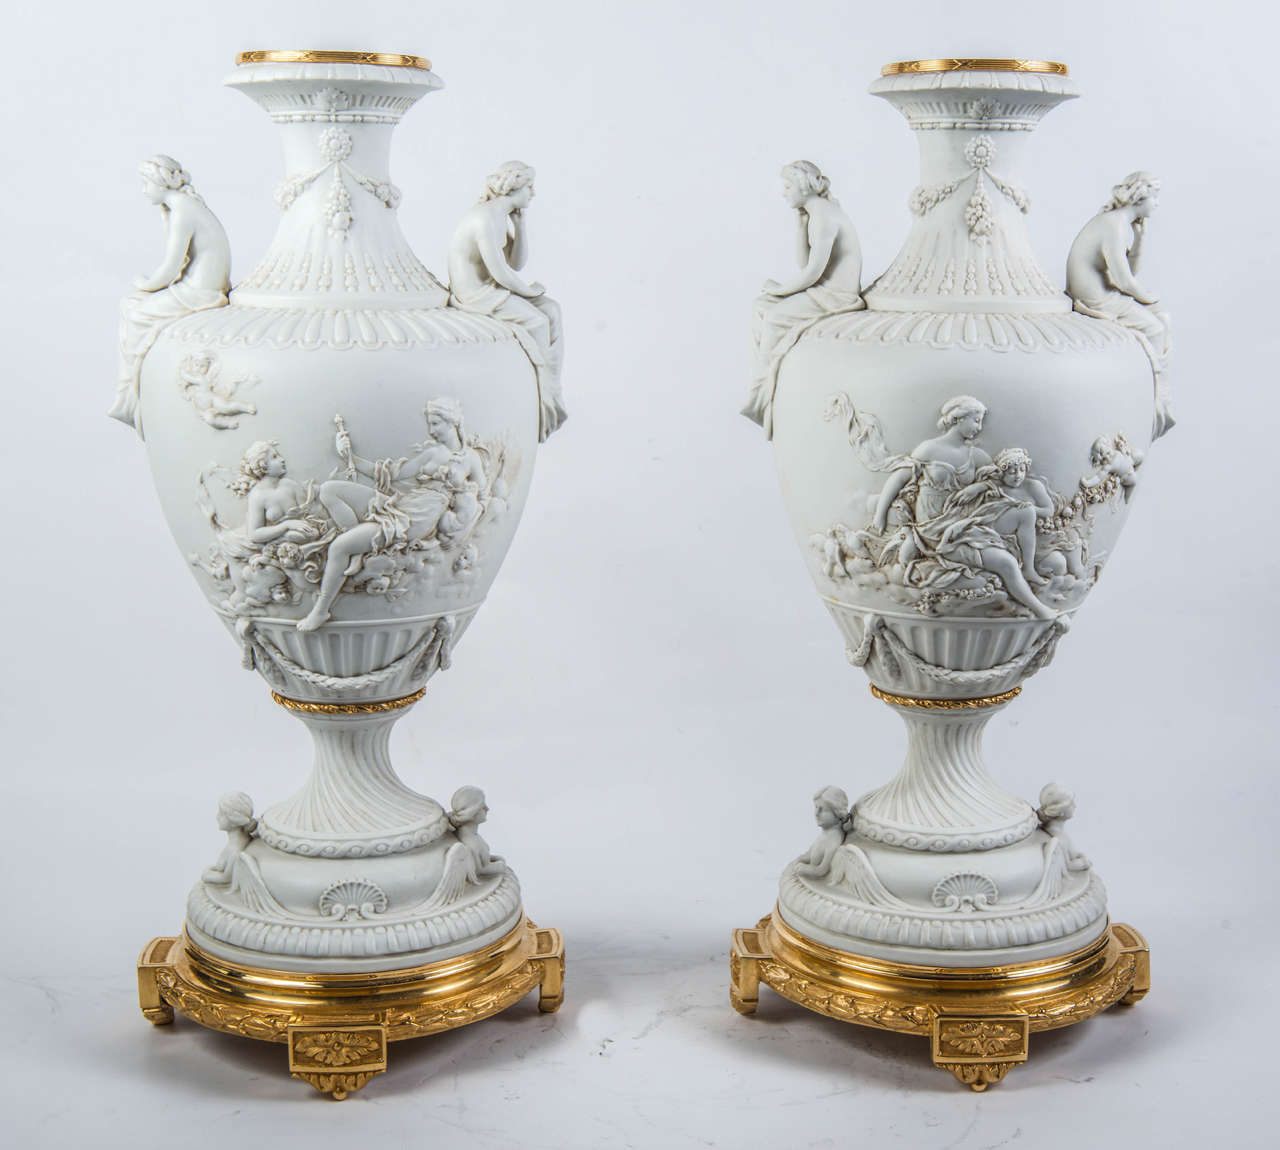 Two vases, Louis XVI style, decorated with Allegoria of Love ( Vénus and putti encarved) are signed in blue letters KE 
porcelain of Rudolstadt.